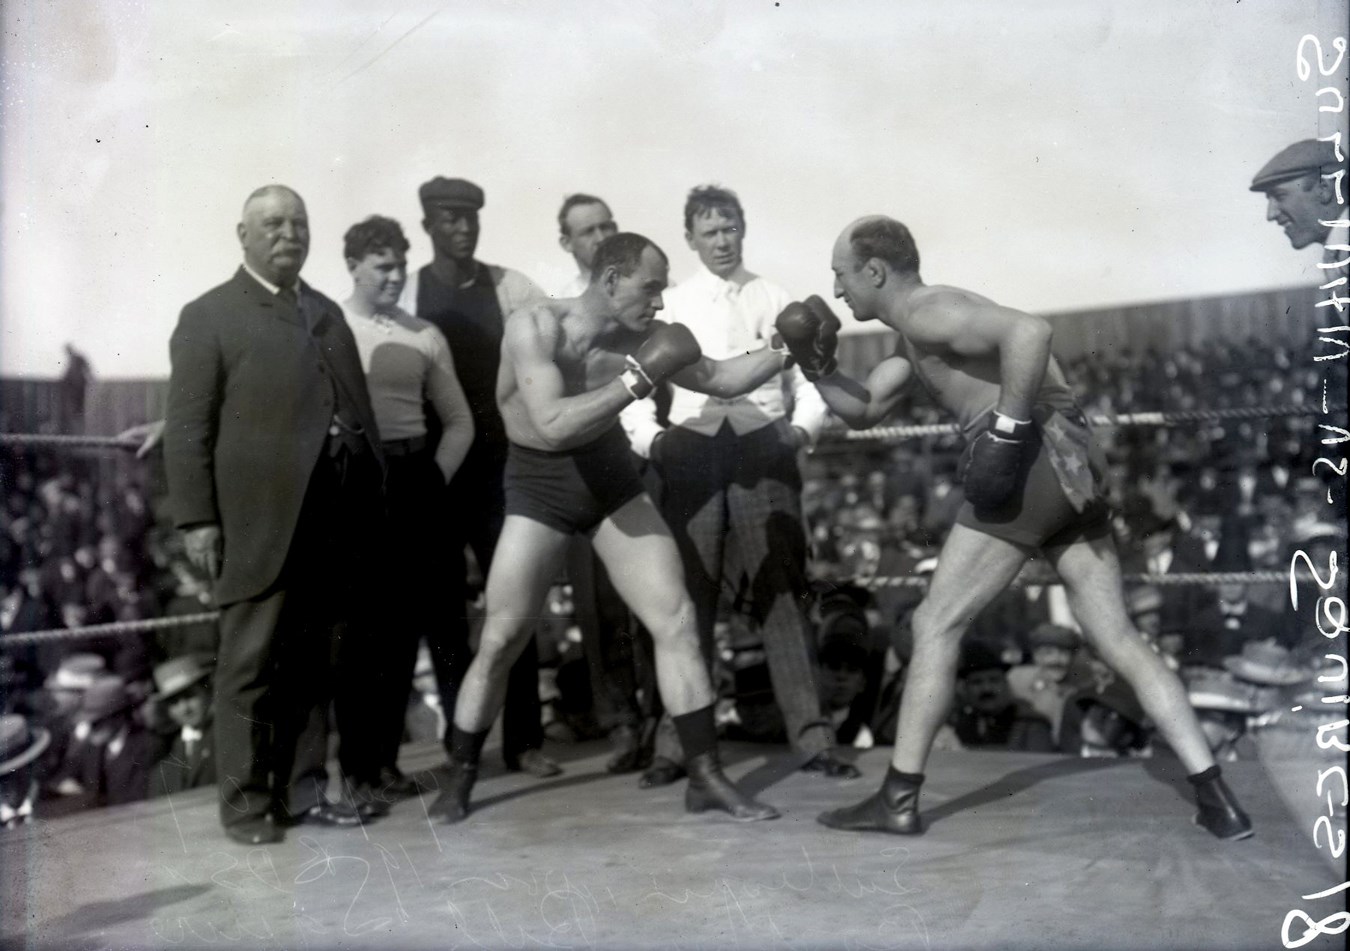 Dana Collection Of Important Boxing Negatives - 1907 Jack "Twin" Sullivan "Lights Out" for Bill Squires Type I Glass Plate Negative by Dana Studio